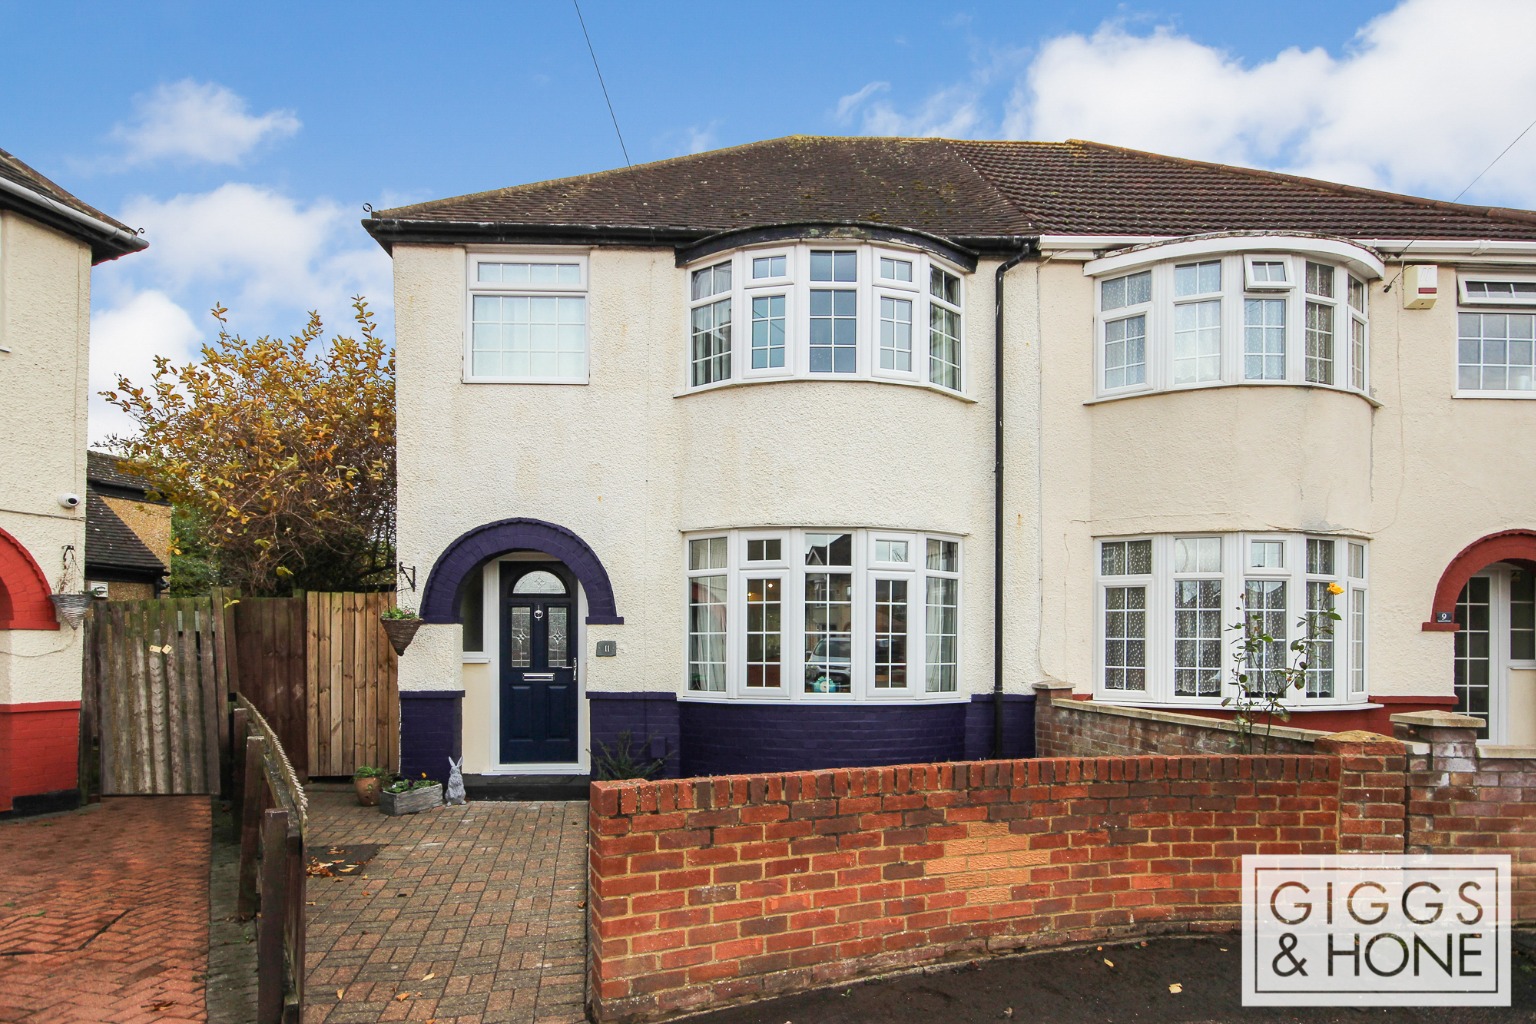 Situated on a large corner plot this fabulous home has been extended to provide spacious living for all the family to enjoy. The property comprises entrance hall, cloakroom, open plan bay fronted lounge and dining room with polished wooden floorboards, kitchen breakfast room